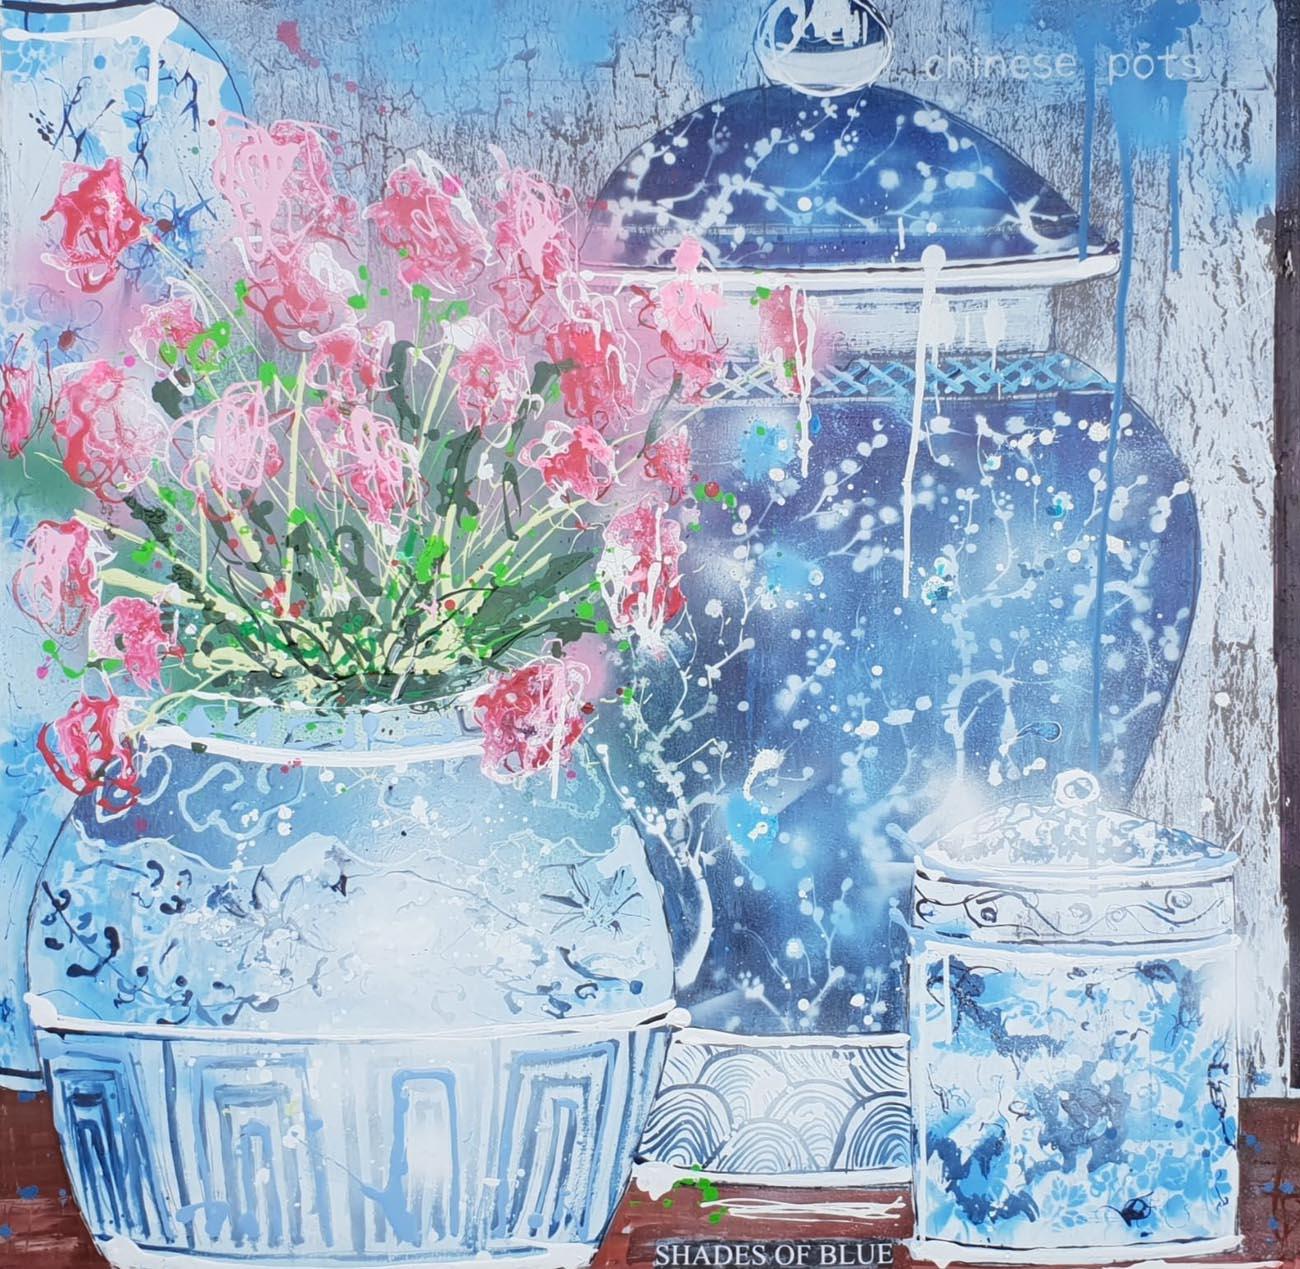 Julia Adams Interior Painting - Shades of Blue and a vase of red flowers, still life painting